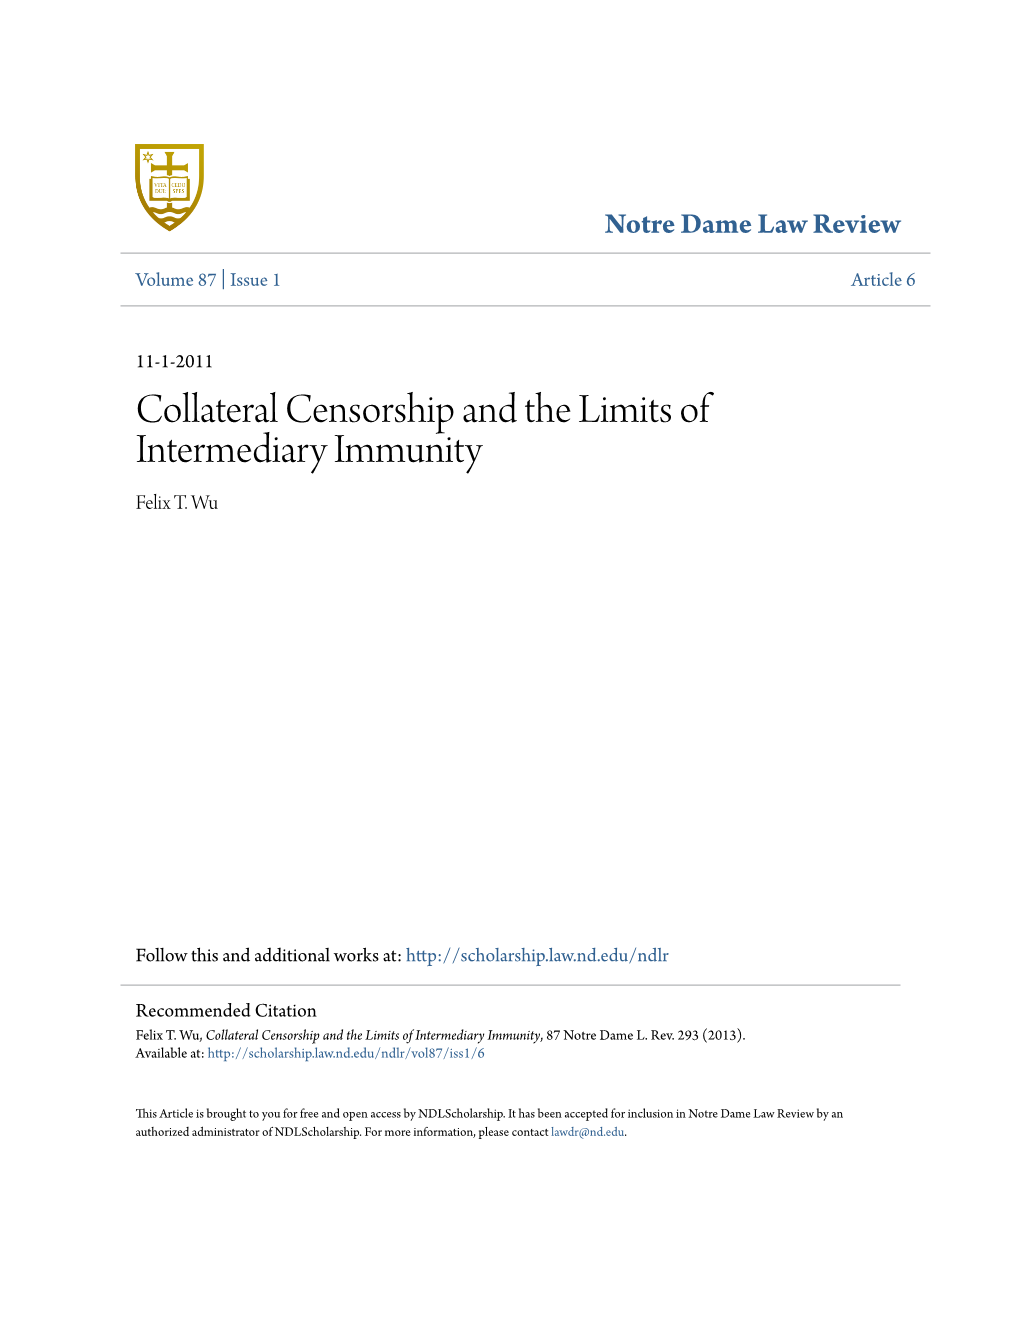 Collateral Censorship and the Limits of Intermediary Immunity Felix T